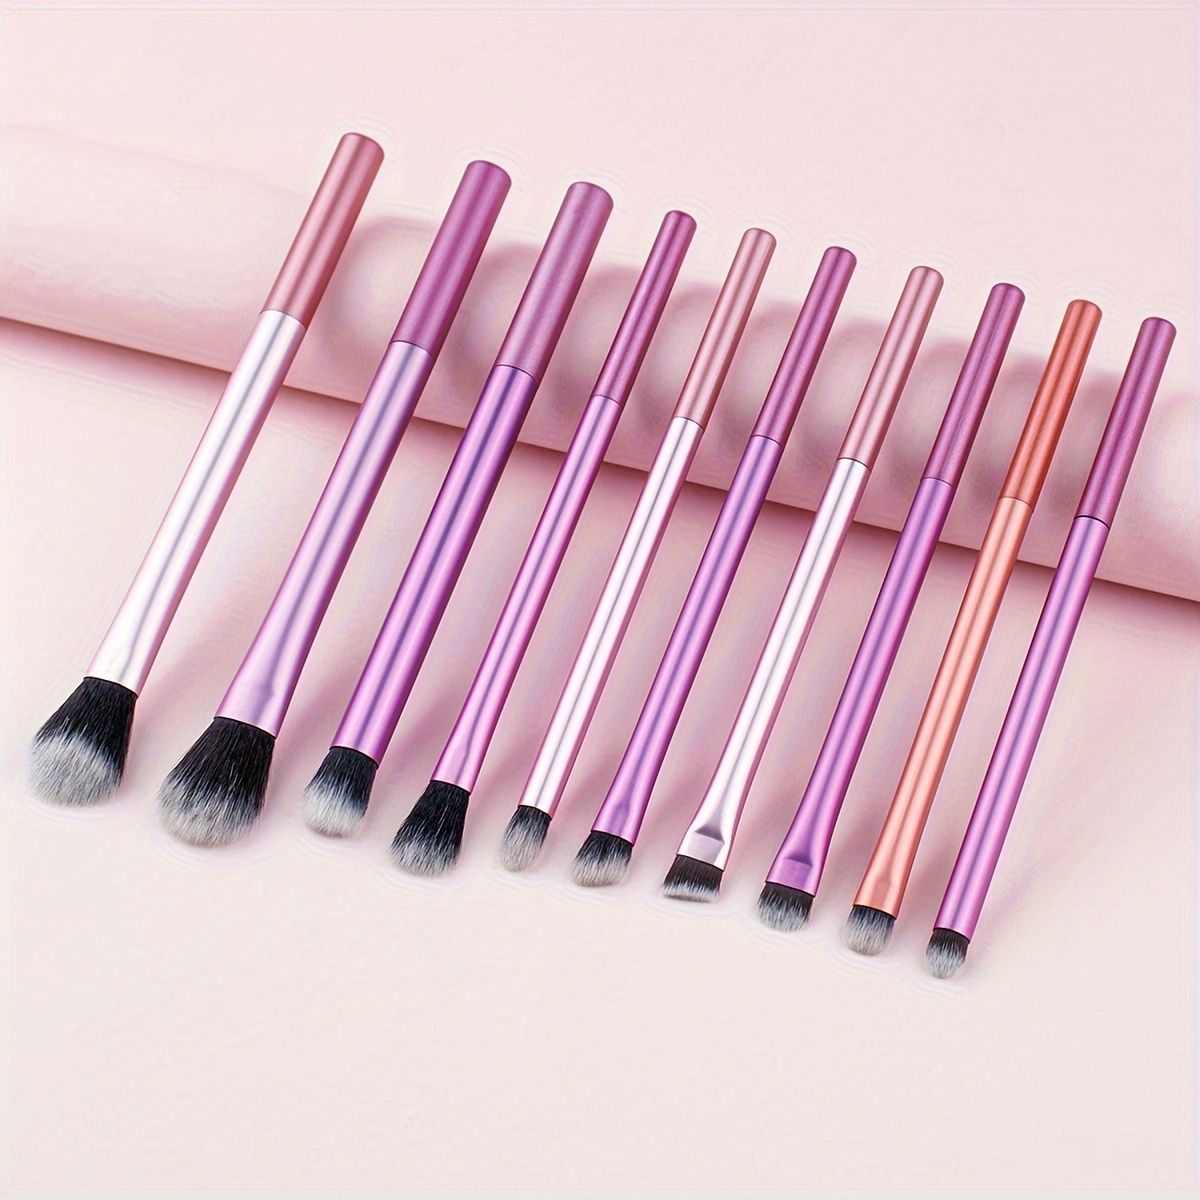 

Eye Makeup Brush Set, 10pcs/set Professional Mix Eyeshadow Makeup Brushes, Suitable For Concealing, Brow Drawing & Eyeliner, Various Eye Makeup Brushes Are Great For Beginners And Artists